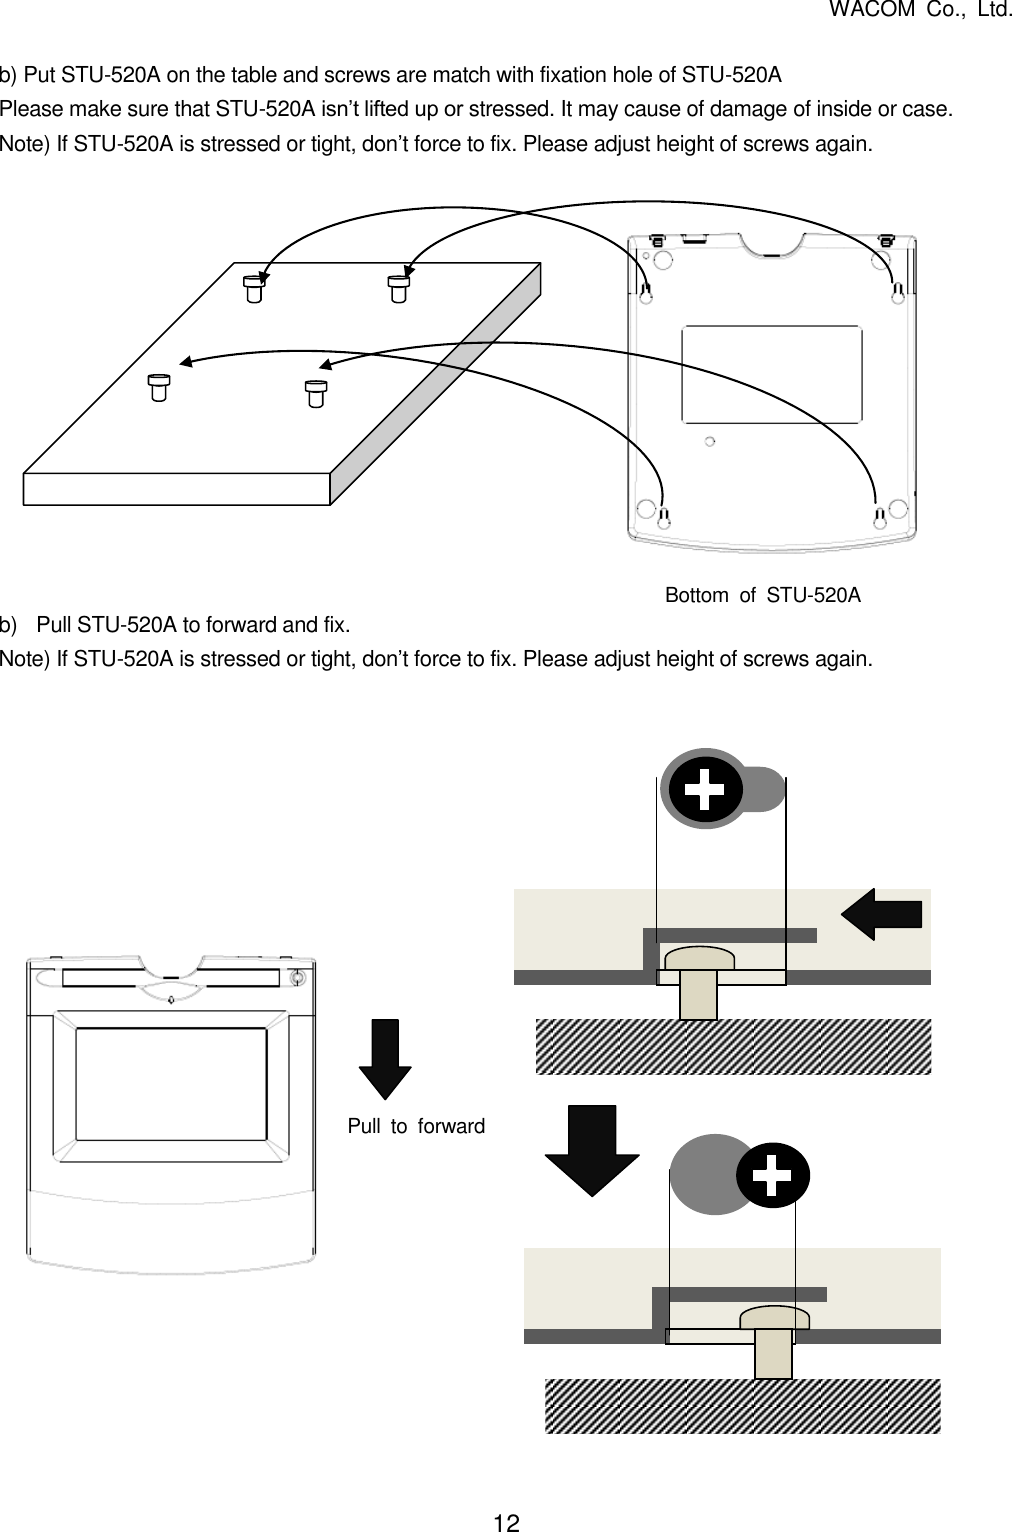   WACOM  Co.,  Ltd. 12   b) Put STU-520A on the table and screws are match with fixation hole of STU-520A Please make sure that STU-520A isn’t lifted up or stressed. It may cause of damage of inside or case. Note) If STU-520A is stressed or tight, don’t force to fix. Please adjust height of screws again.              b)  Pull STU-520A to forward and fix. Note) If STU-520A is stressed or tight, don’t force to fix. Please adjust height of screws again.                      Bottom  of  STU-520A Pull  to  forward 